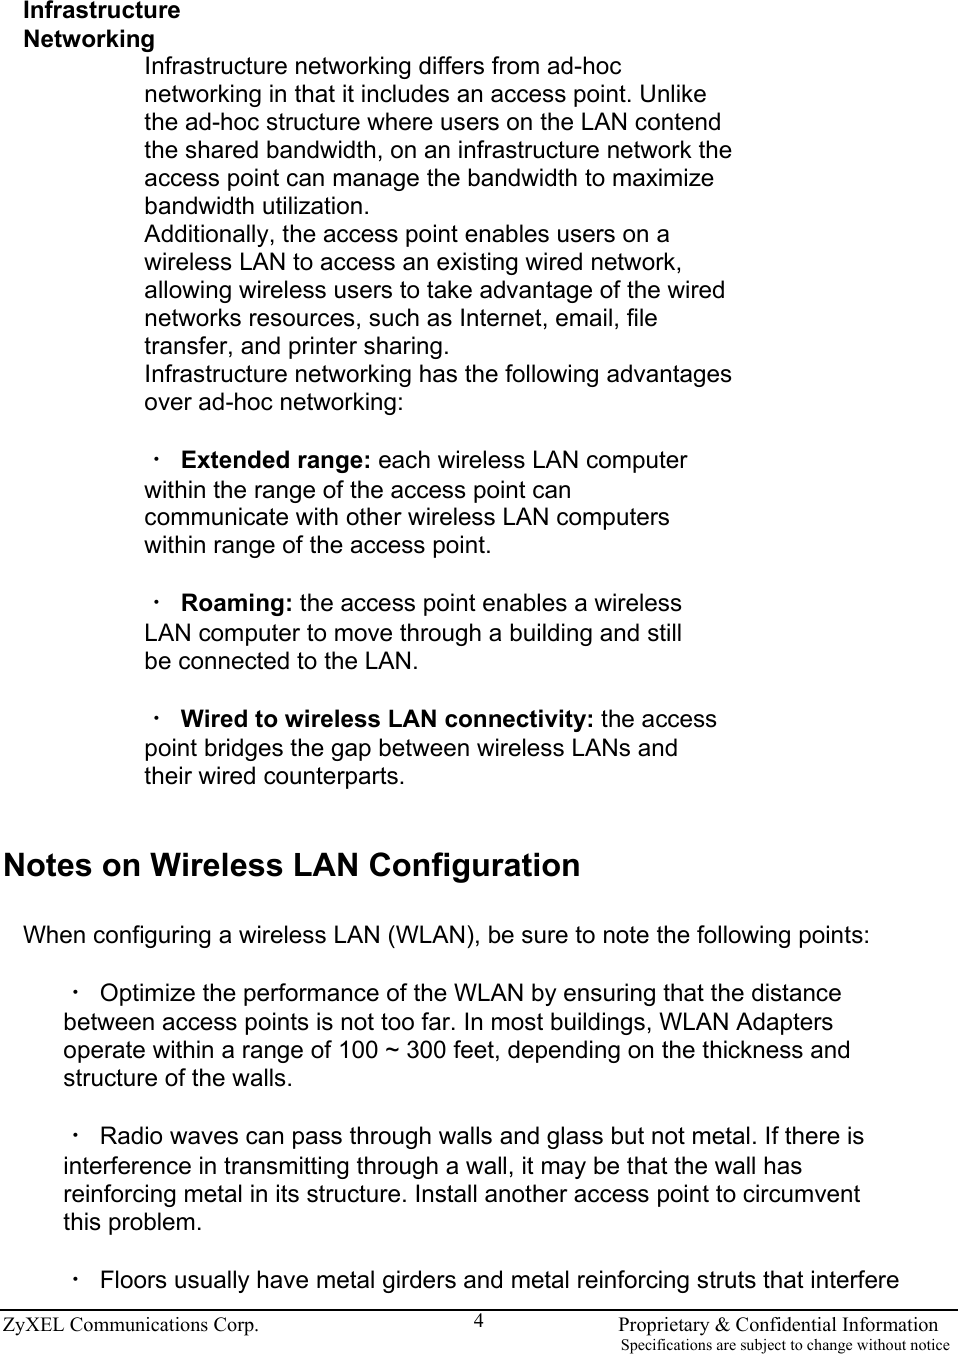  ZyXEL Communications Corp.                                                                       Proprietary &amp; Confidential Information                                                                                                                           Specifications are subject to change without notice 4 Infrastructure Networking Infrastructure networking differs from ad-hoc networking in that it includes an access point. Unlike the ad-hoc structure where users on the LAN contend the shared bandwidth, on an infrastructure network the access point can manage the bandwidth to maximize bandwidth utilization. Additionally, the access point enables users on a wireless LAN to access an existing wired network, allowing wireless users to take advantage of the wired networks resources, such as Internet, email, file transfer, and printer sharing. Infrastructure networking has the following advantages over ad-hoc networking:  ‧ Extended range: each wireless LAN computer within the range of the access point can communicate with other wireless LAN computers within range of the access point.  ‧ Roaming: the access point enables a wireless LAN computer to move through a building and still be connected to the LAN.  ‧ Wired to wireless LAN connectivity: the access point bridges the gap between wireless LANs and their wired counterparts.   Notes on Wireless LAN Configuration  When configuring a wireless LAN (WLAN), be sure to note the following points:  ‧ Optimize the performance of the WLAN by ensuring that the distance between access points is not too far. In most buildings, WLAN Adapters operate within a range of 100 ~ 300 feet, depending on the thickness and structure of the walls.  ‧ Radio waves can pass through walls and glass but not metal. If there is interference in transmitting through a wall, it may be that the wall has reinforcing metal in its structure. Install another access point to circumvent this problem.  ‧ Floors usually have metal girders and metal reinforcing struts that interfere 